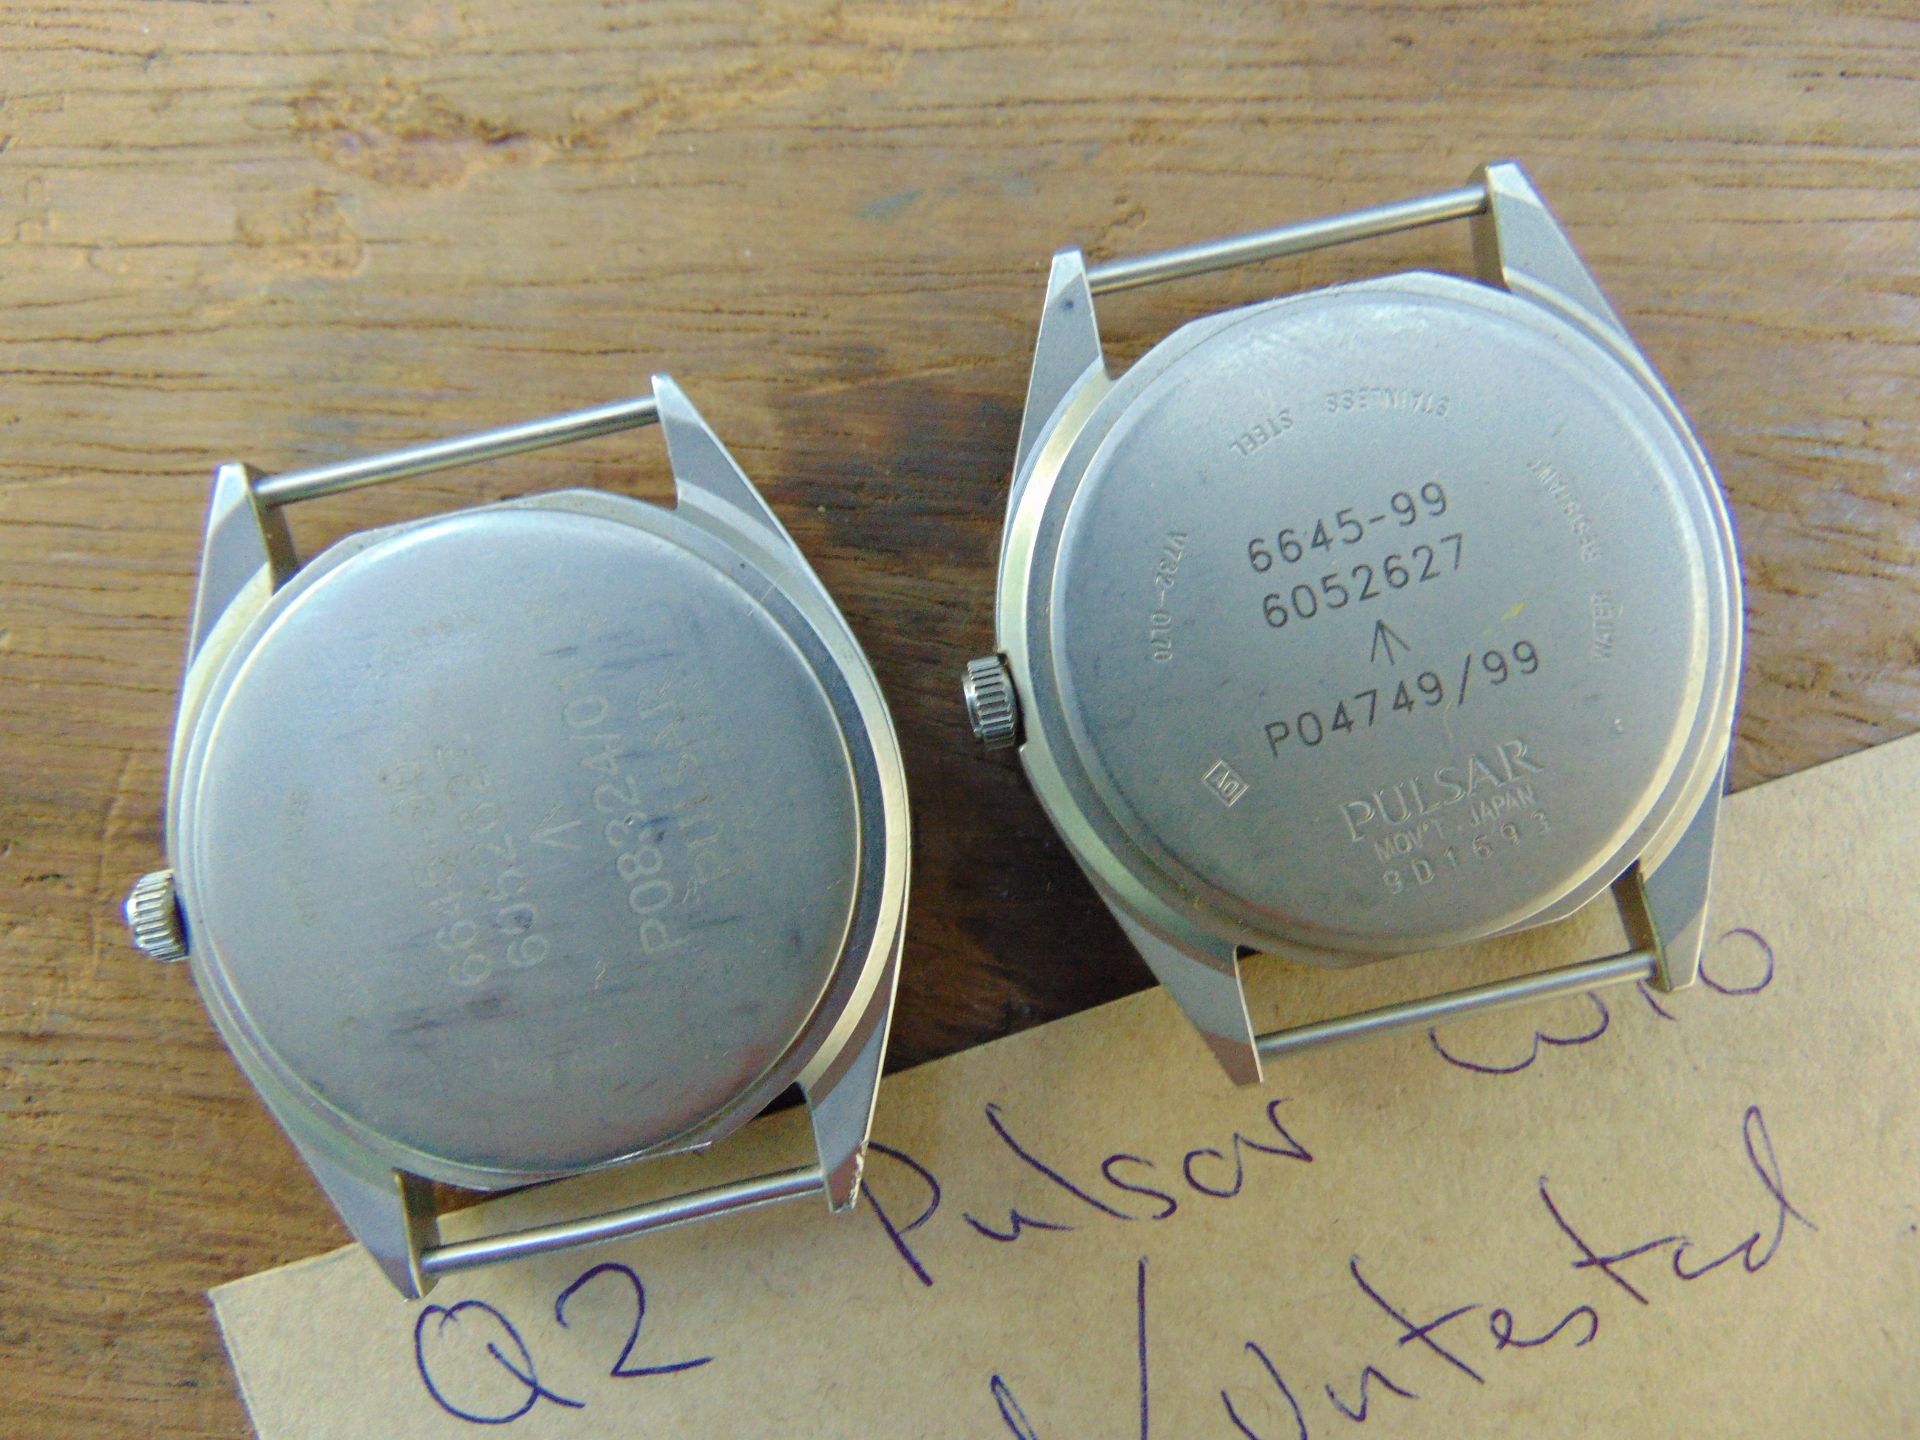 2 x Pulsar G10 watches - Image 4 of 4